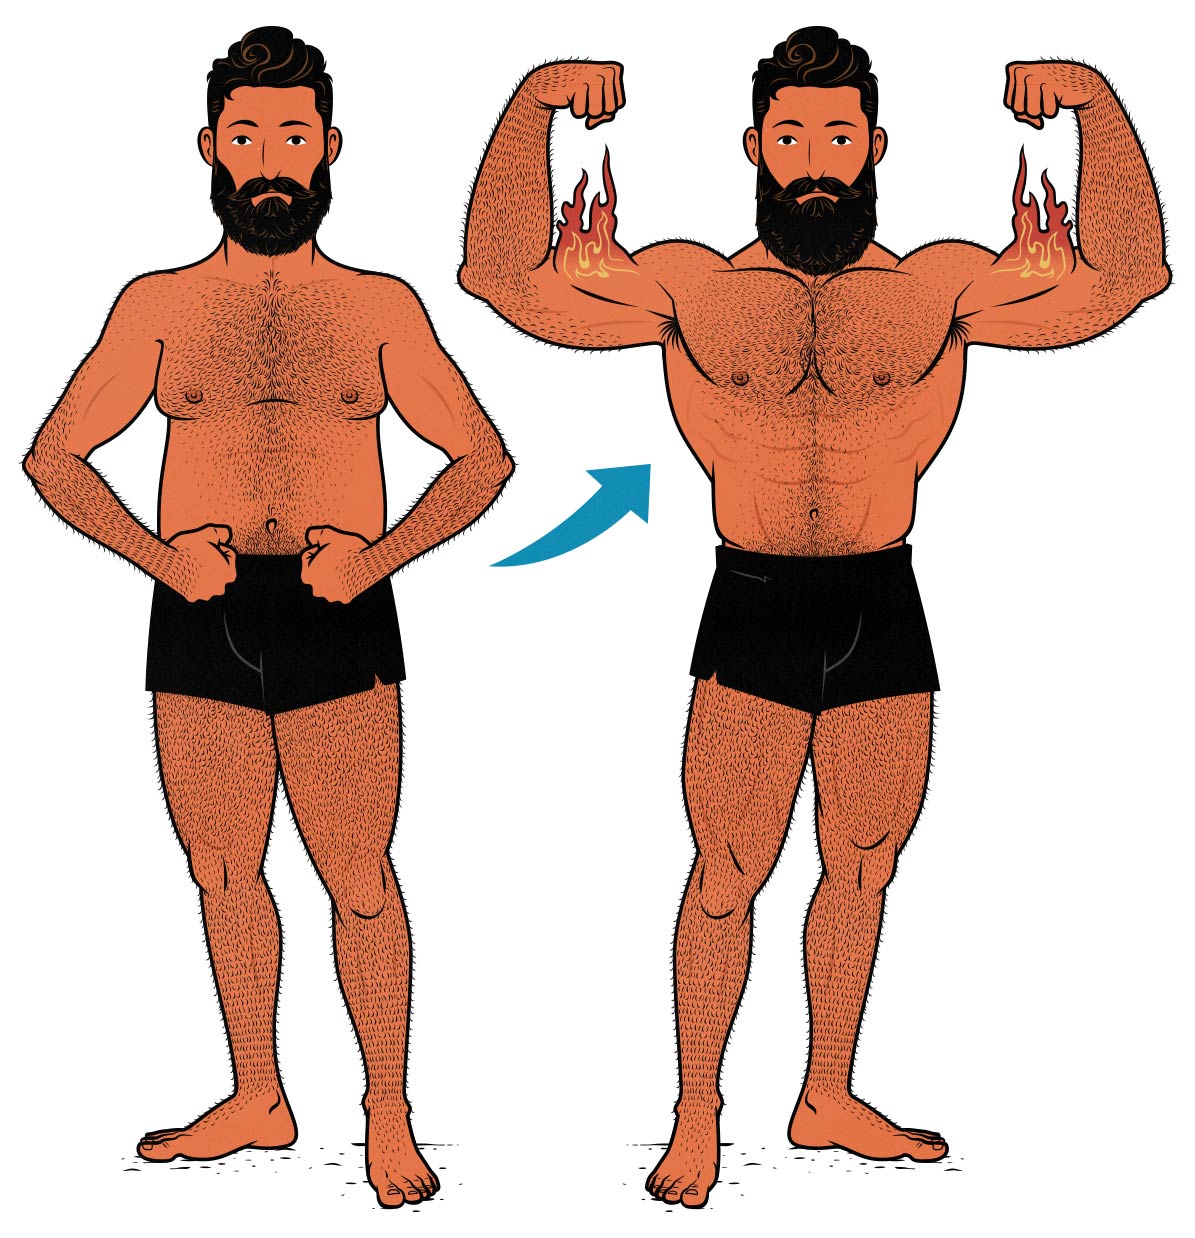 Illustration of a bodybuilder recomping by doing lengthened partial workouts.